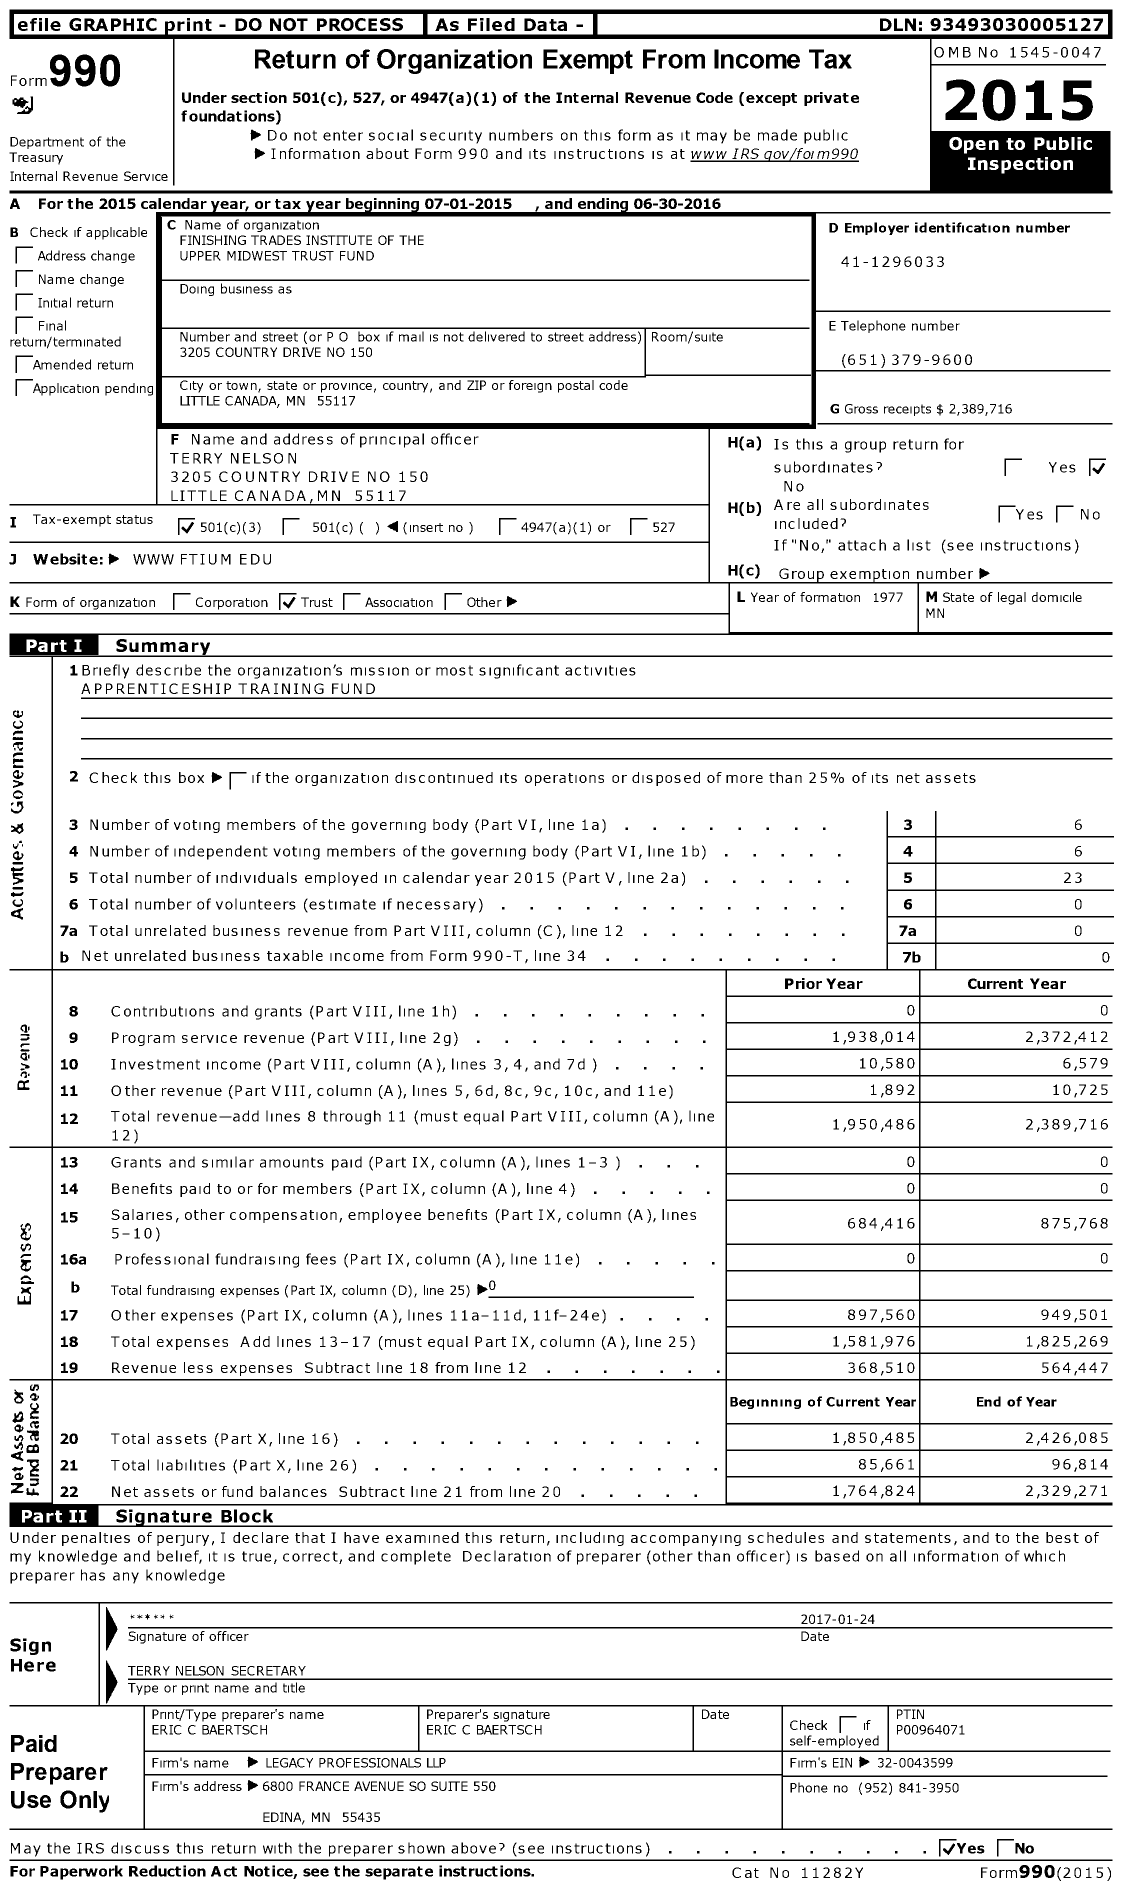 Image of first page of 2015 Form 990 for Finishing Trades Institute of the Upper Midwest Trust Fund